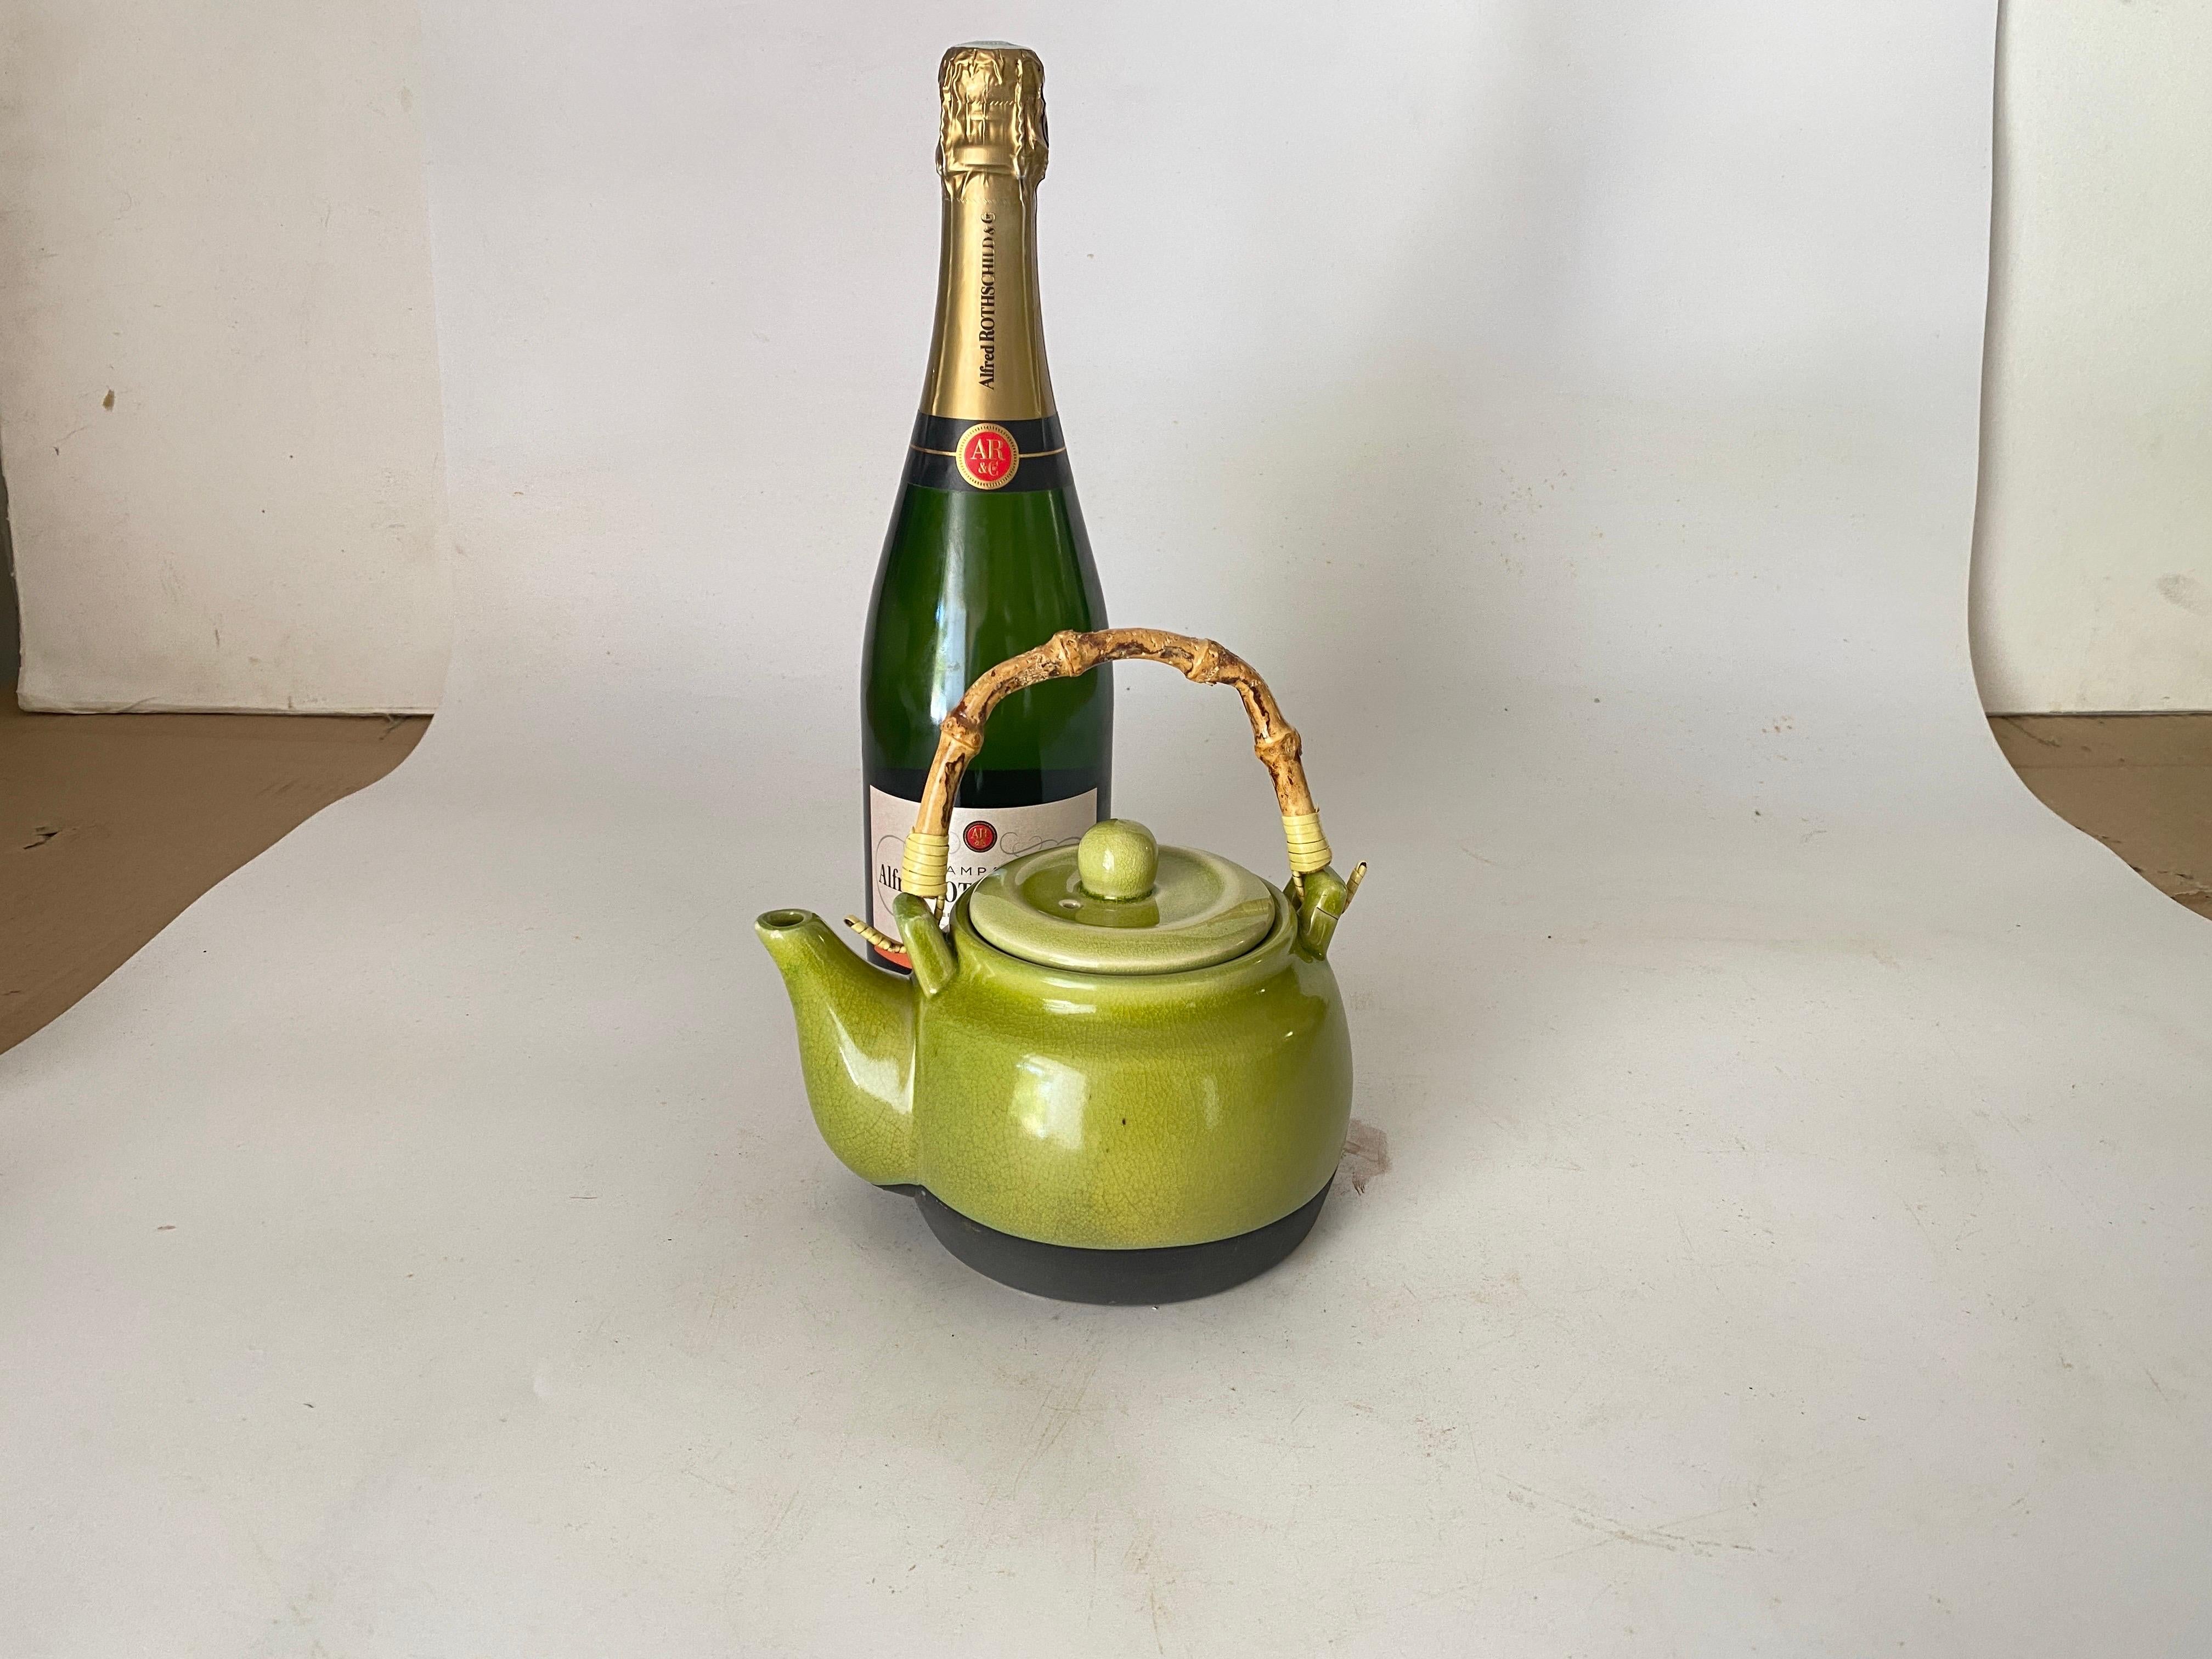 Crakeled Ceramic Tea Pot Attributed Green Color 20 th Century France For Sale 4